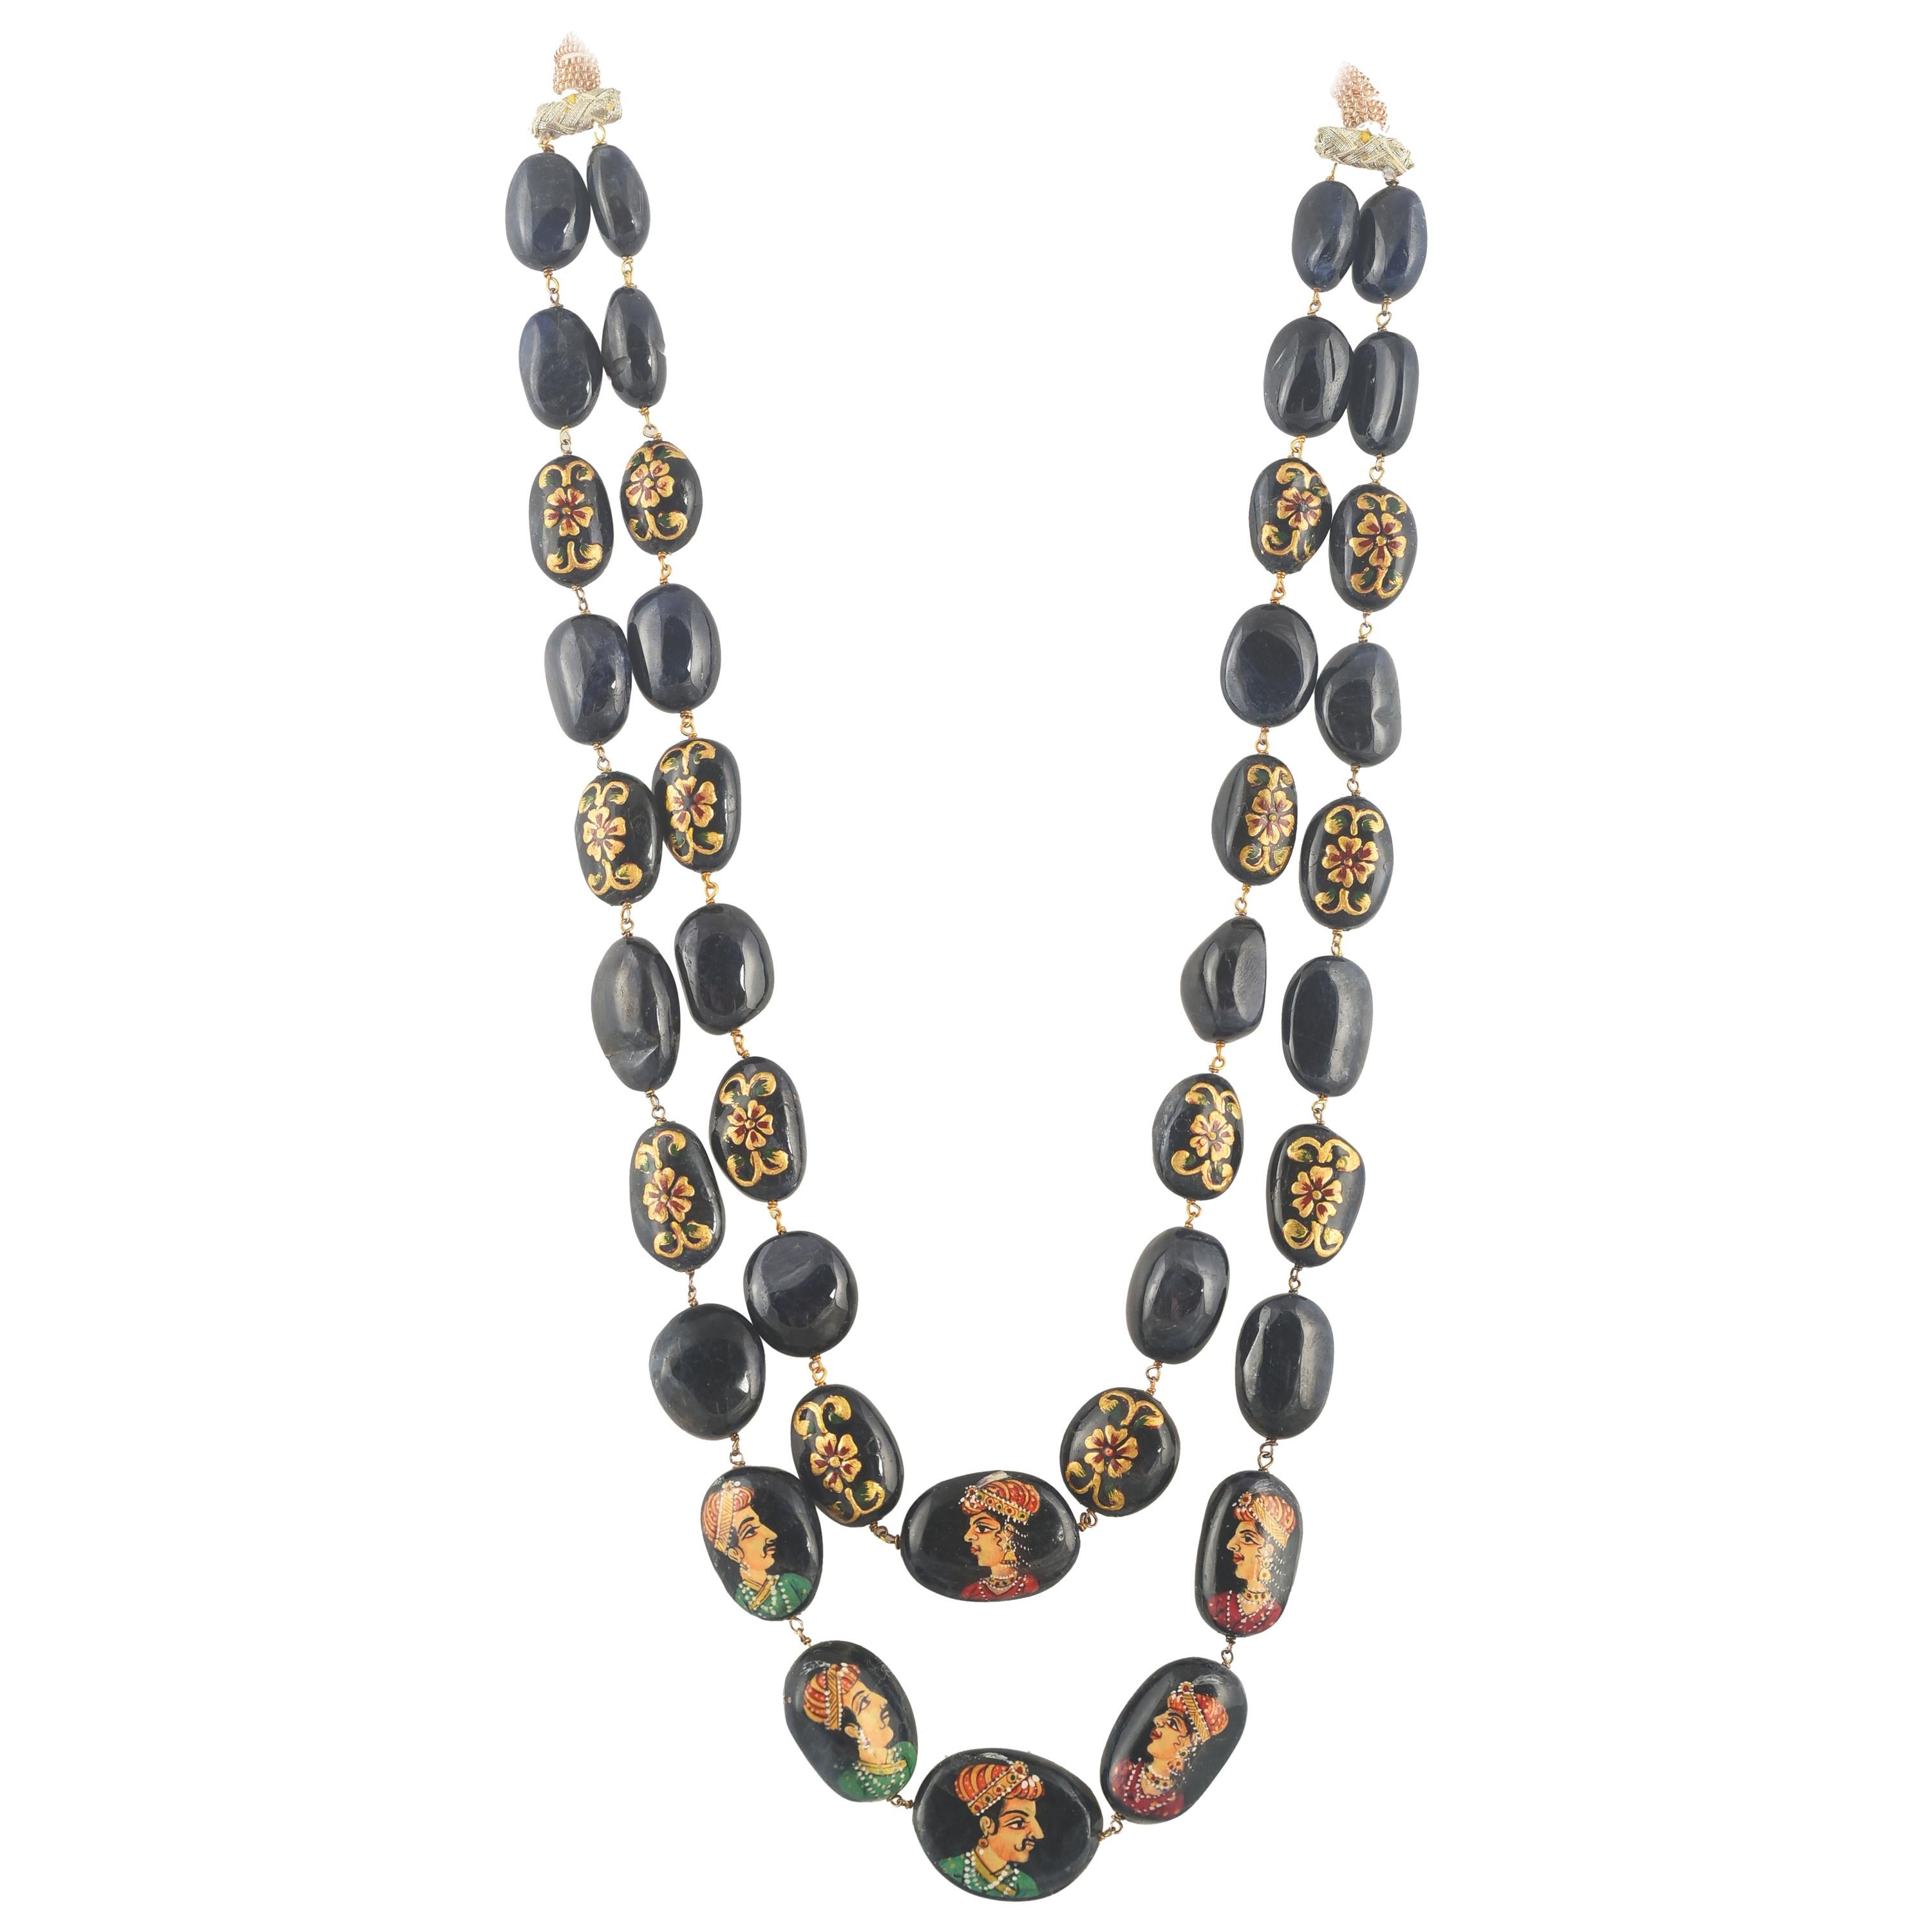 1553 Carat of Natural Burma, Mughal Hand Painted Blue Sapphire Bead Necklace For Sale